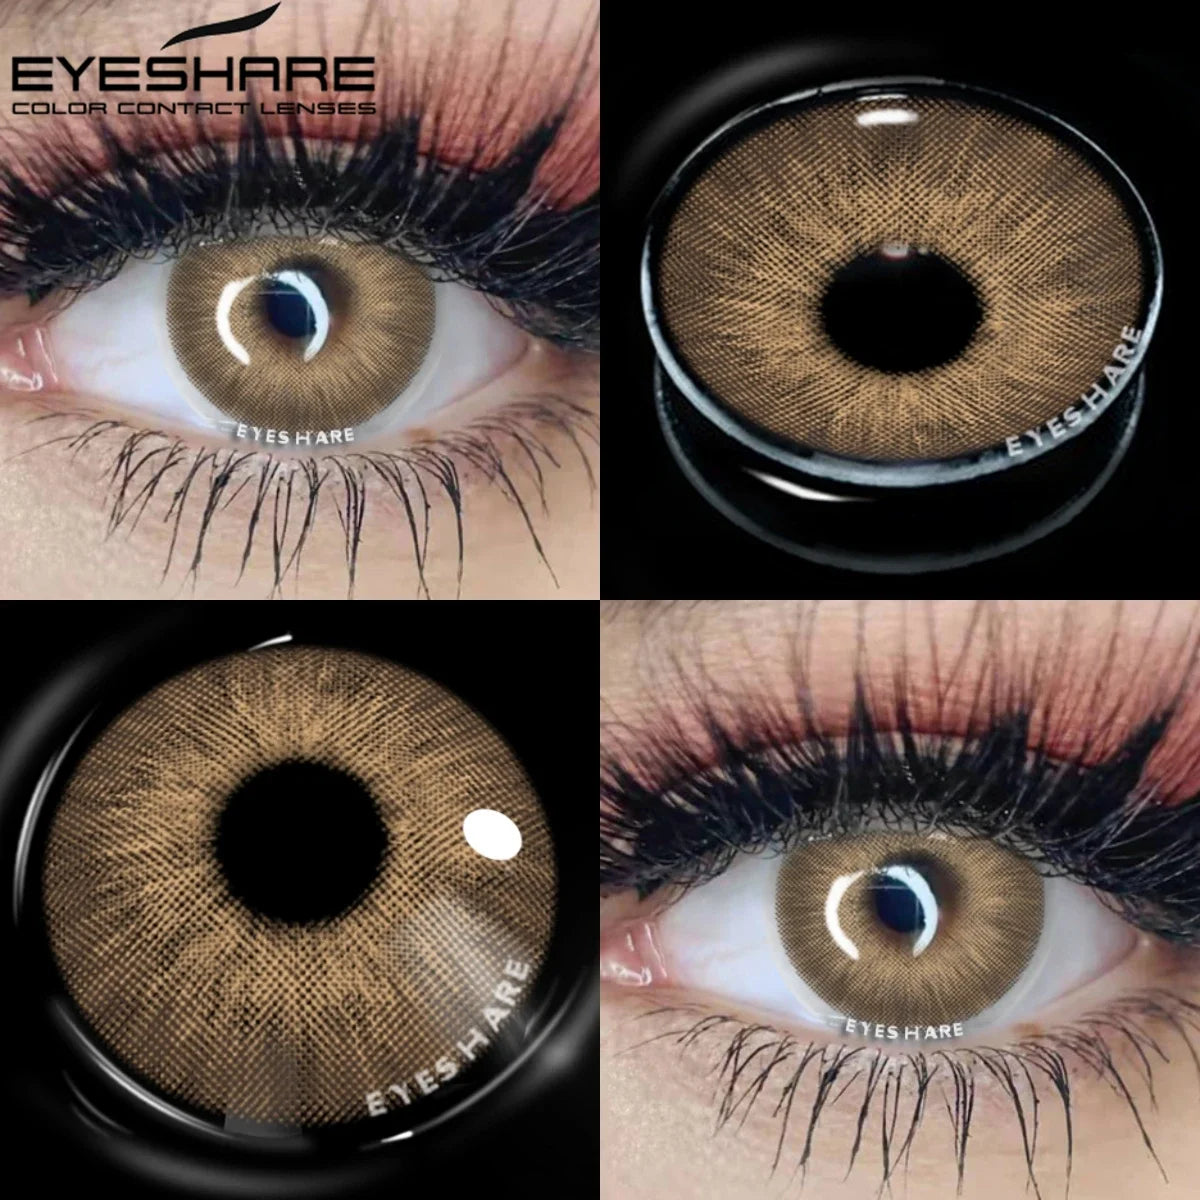 Ihomed 1pair Colored Contact Lenses Natural Brown Color Lenses Yearly Use Beauty Makeup for Eyes Contact Lenses For Eyes Color